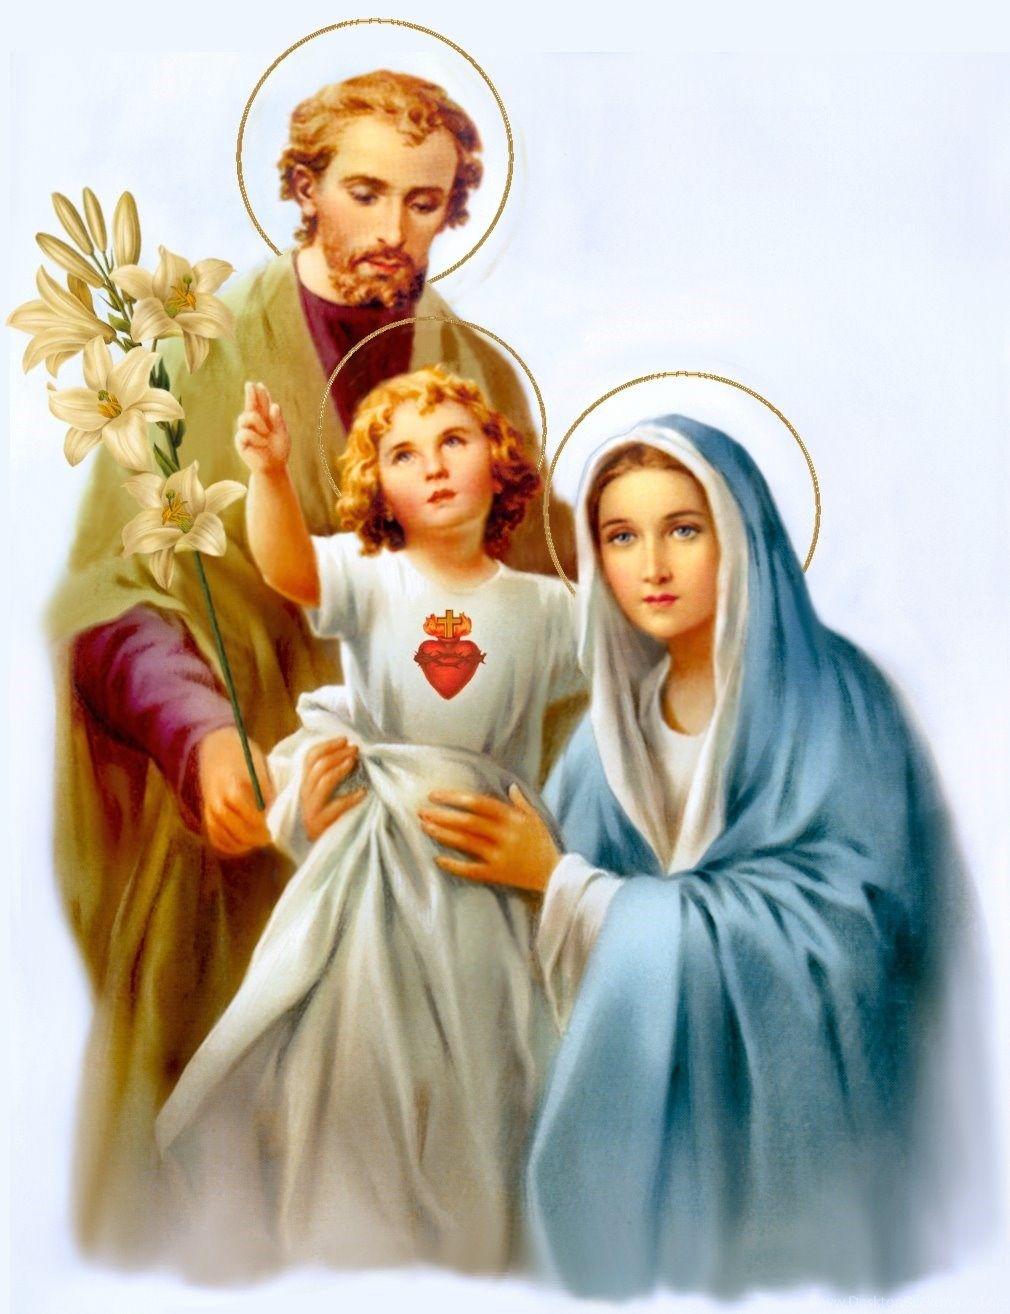 Picture Of Jesus And Mary All Wallpaper New Desktop Background